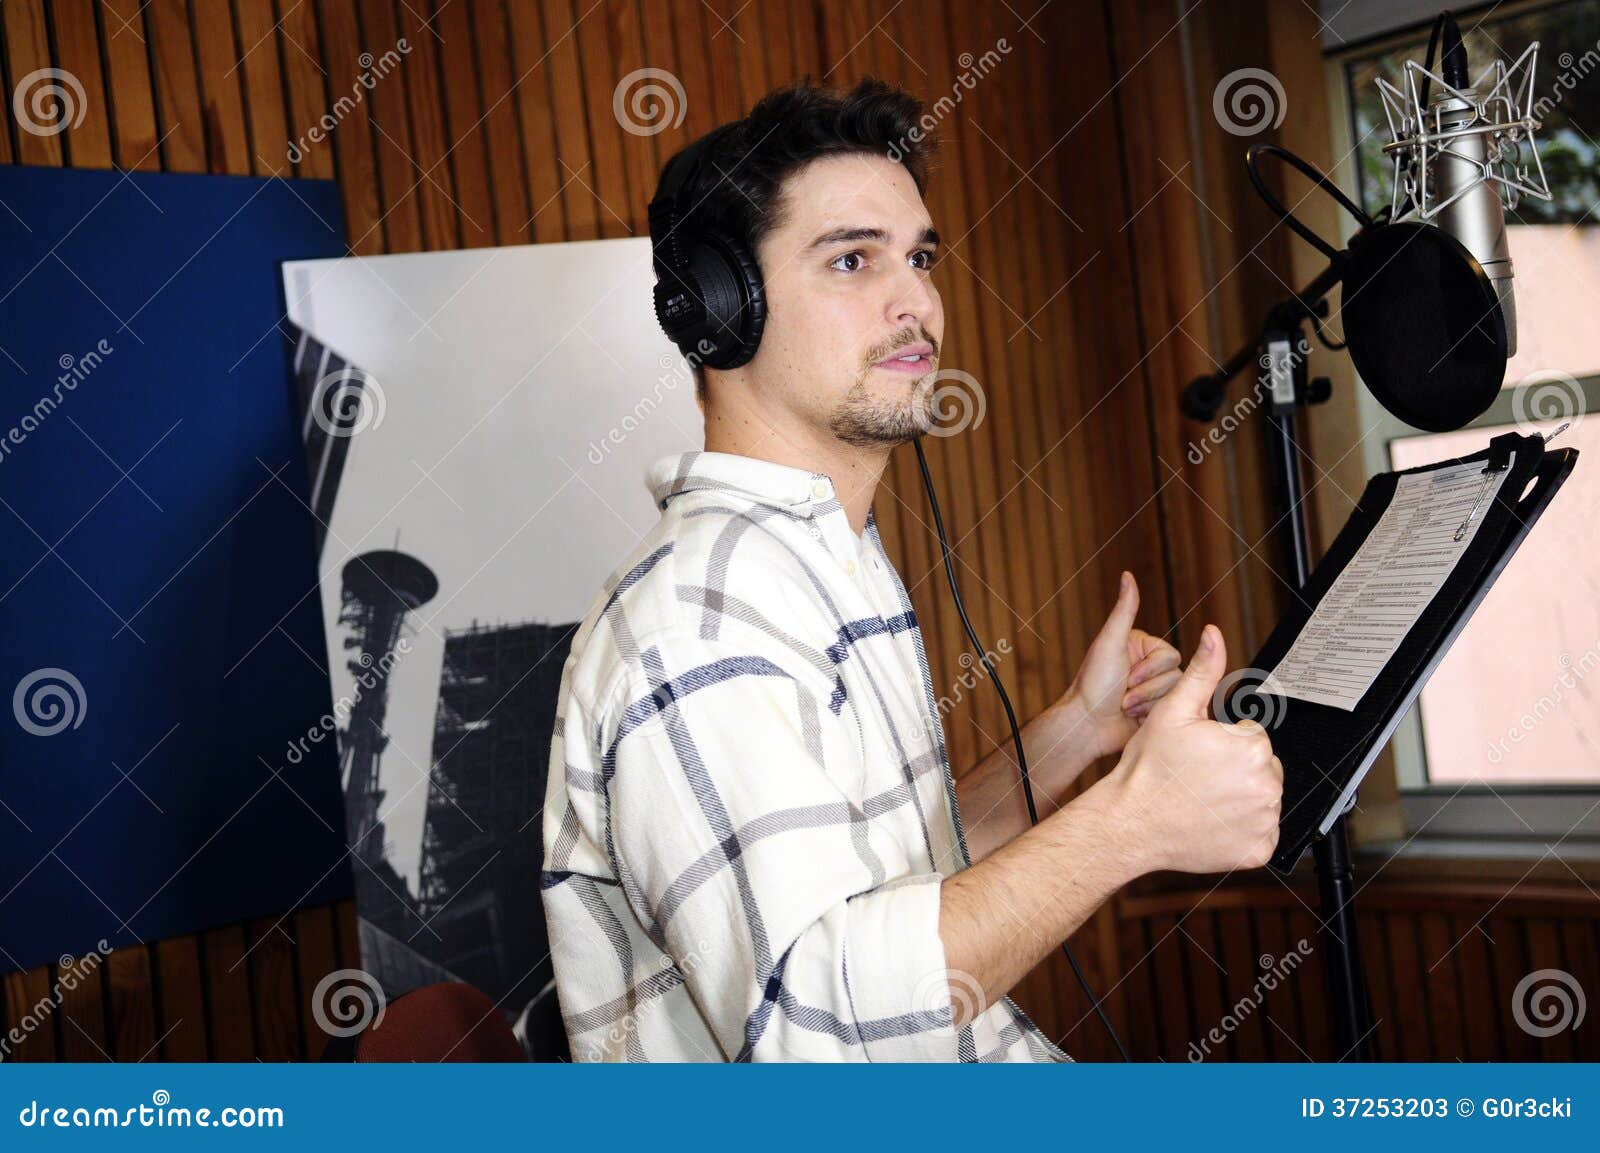 http://thumbs.dreamstime.com/z/diogo-morgado-studio-playstation-portugal-portuguese-actor-giving-voice-to-delsin-rowe-new-version-infamous-second-37253203.jpg